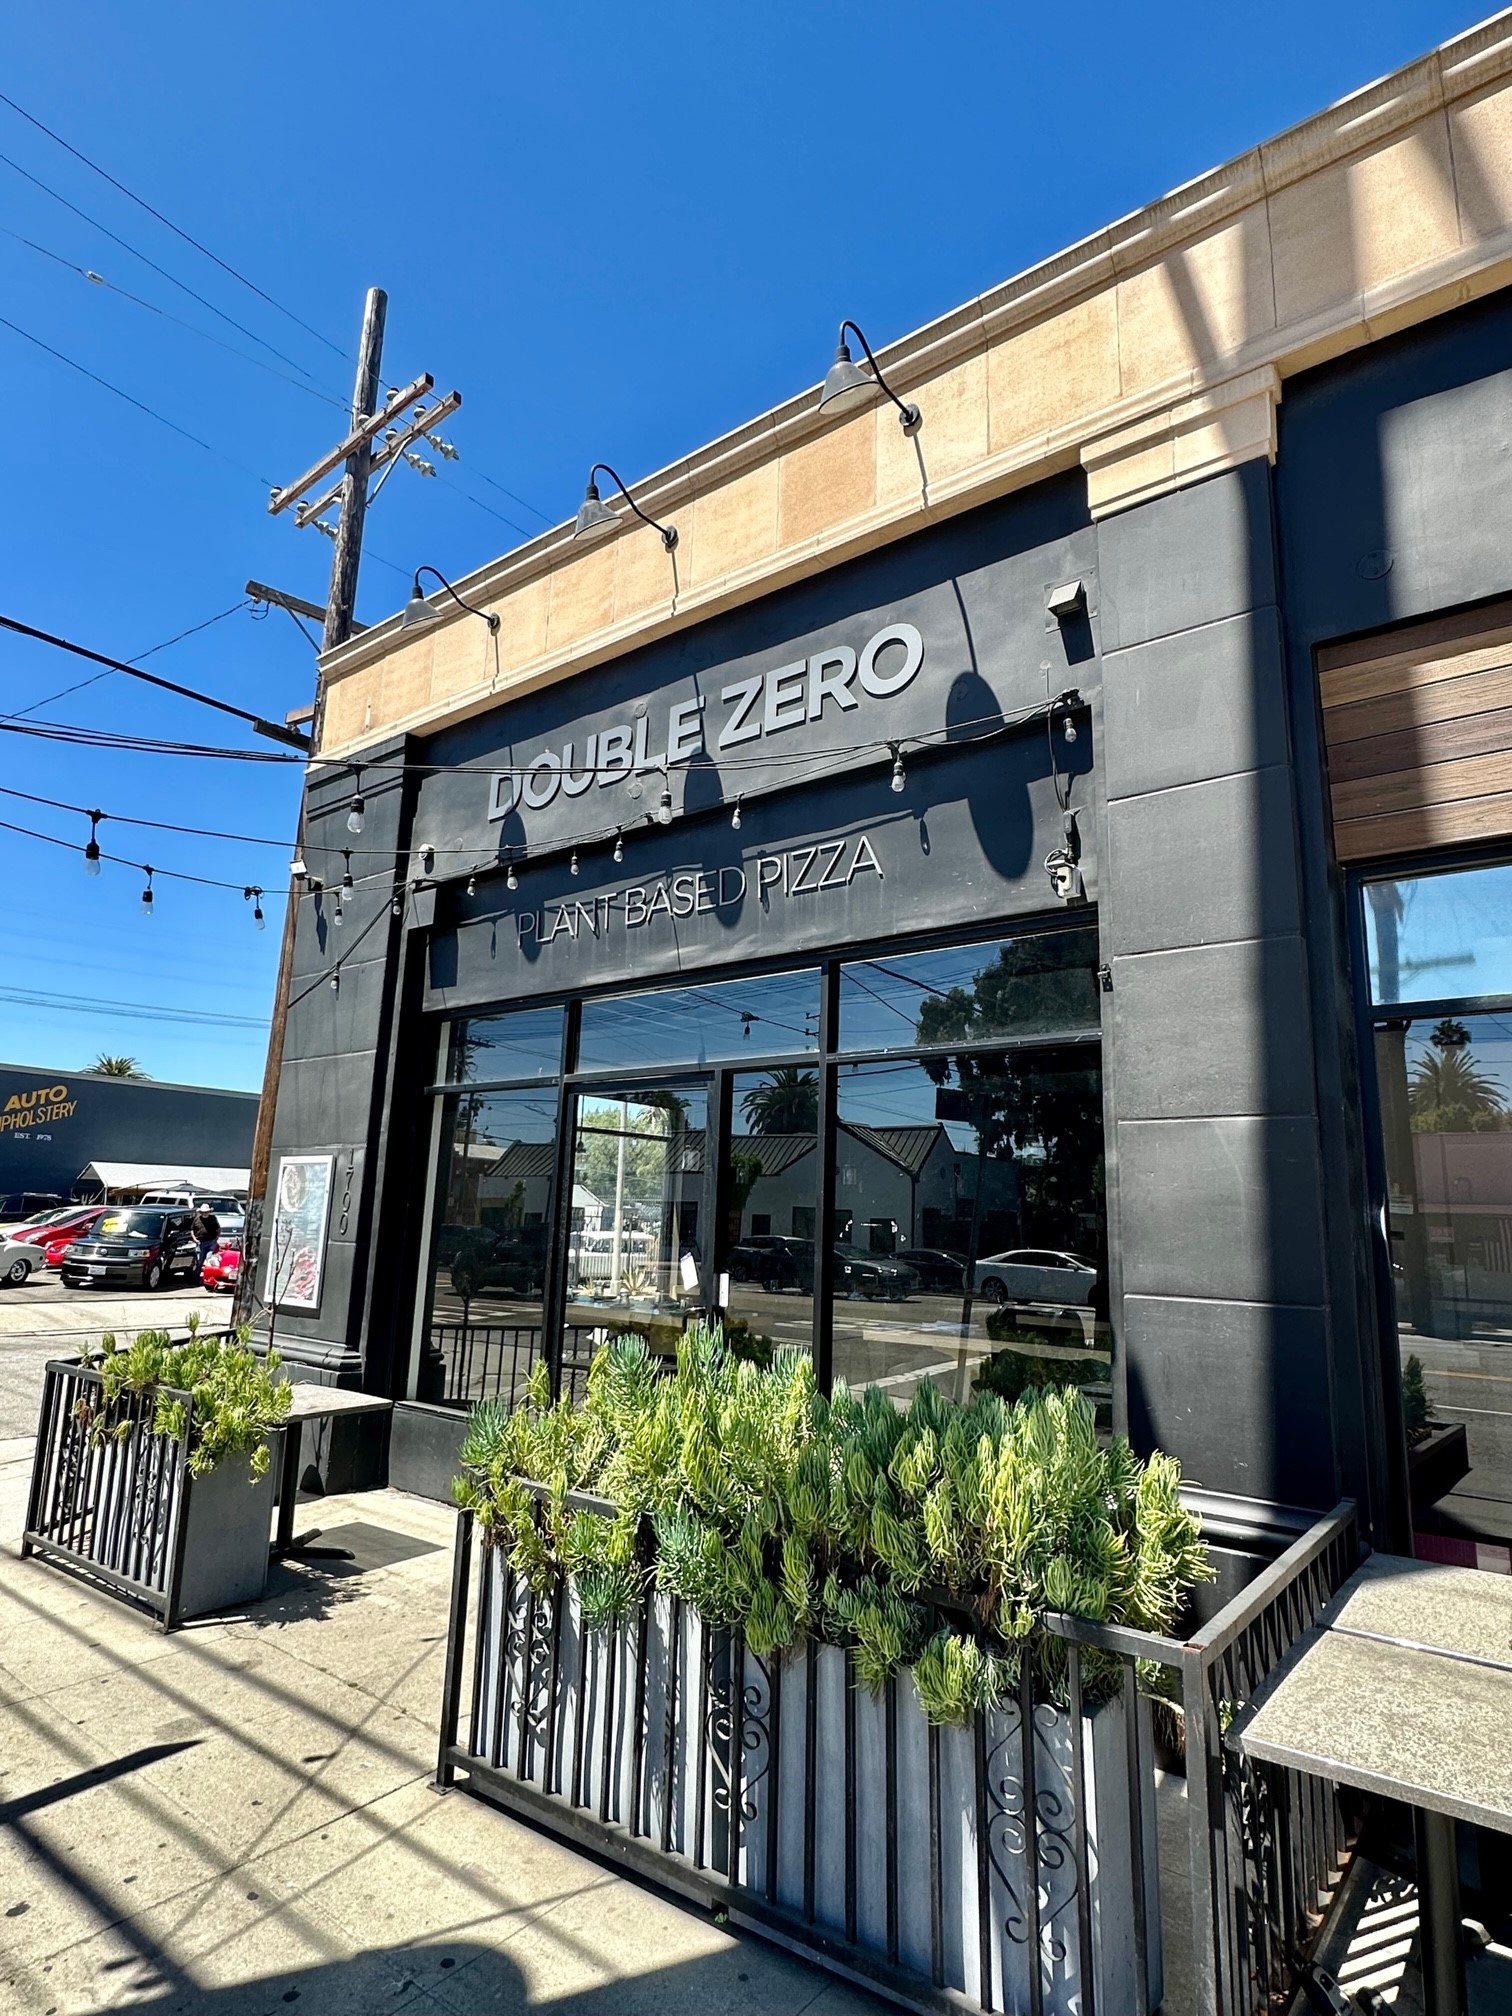 What's Going On At Double Zero In Venice?